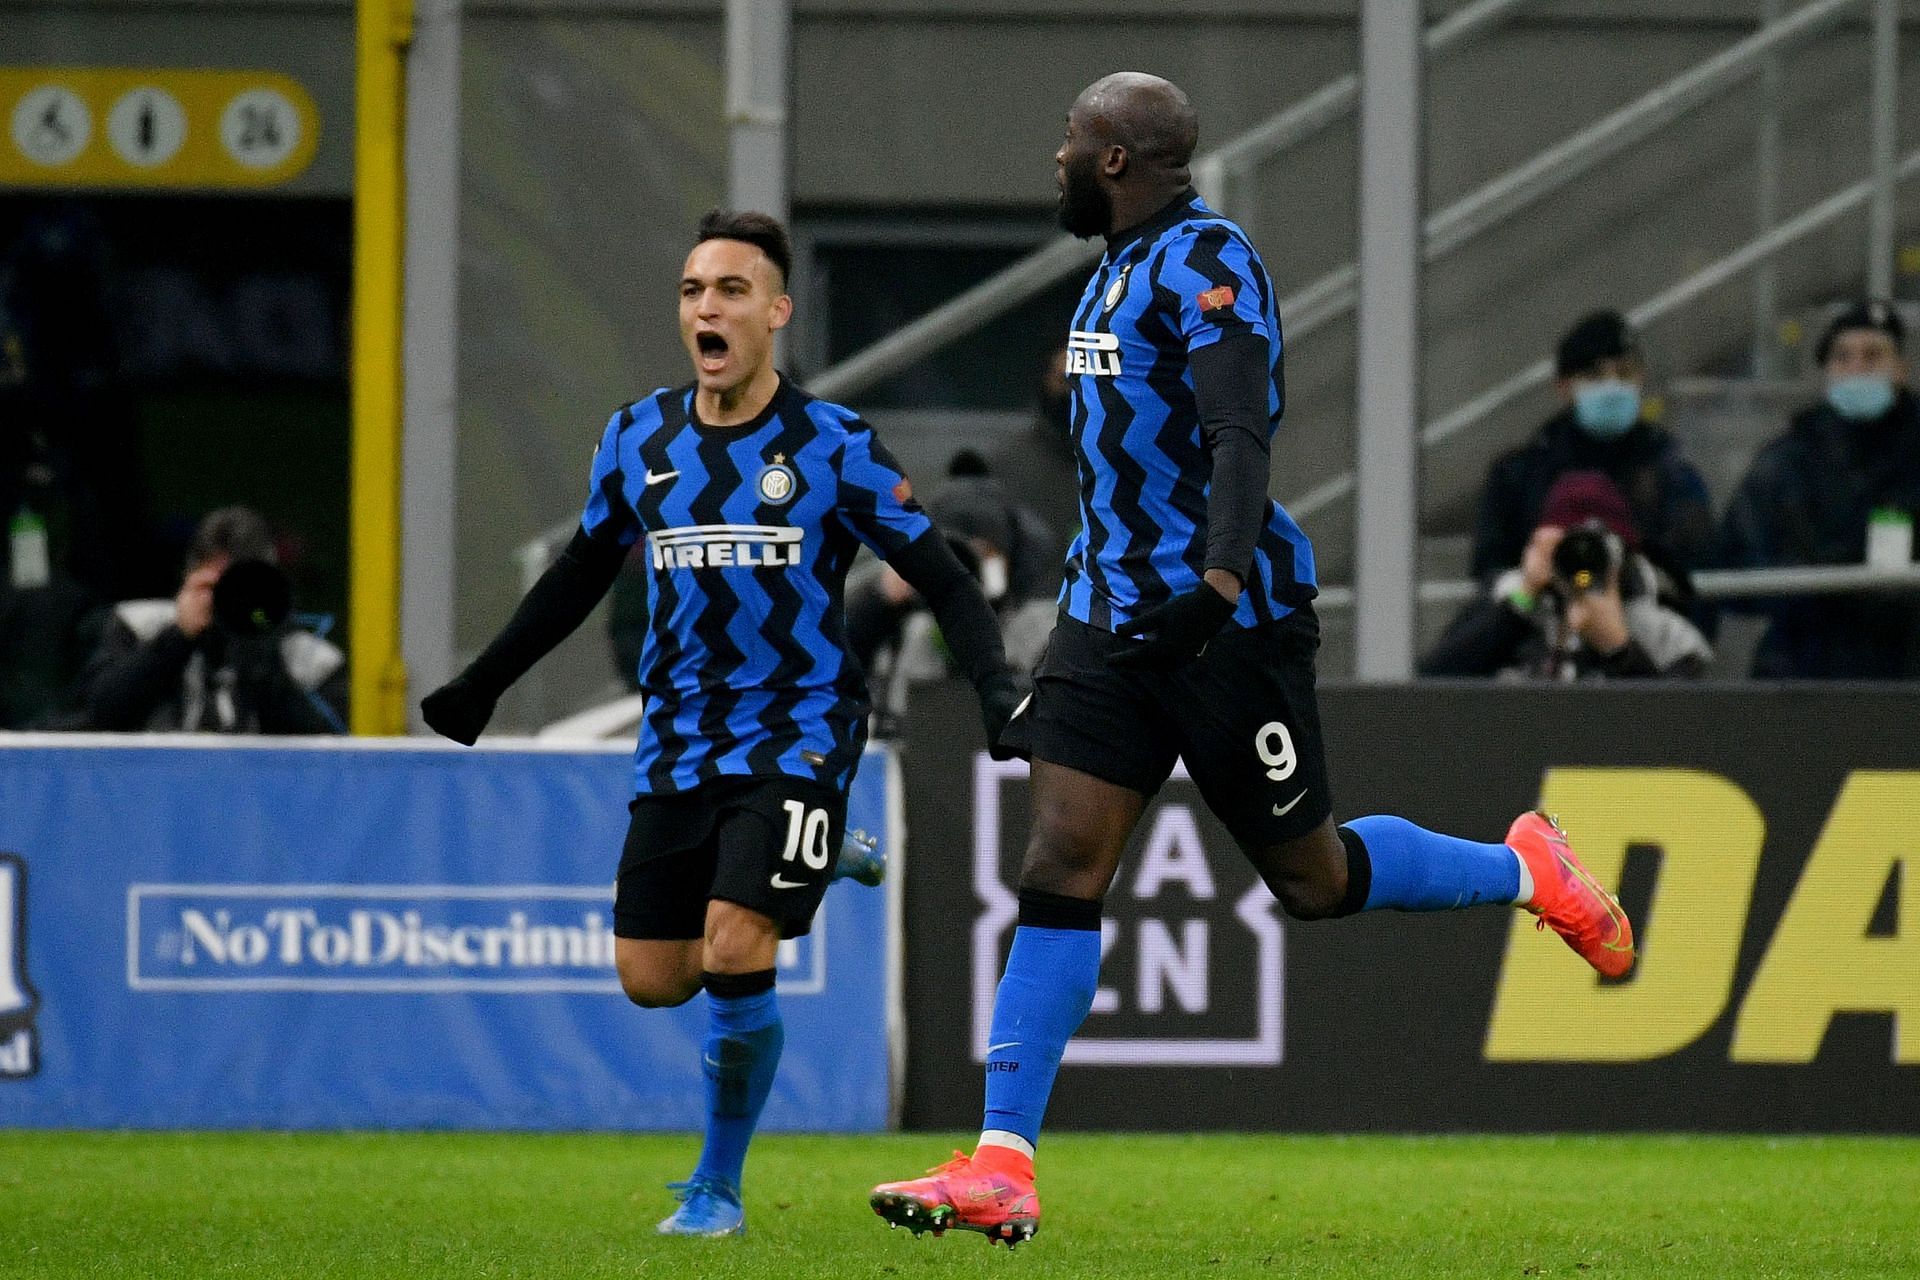 Lukaku and Martinez were a formidable strike force at Inter